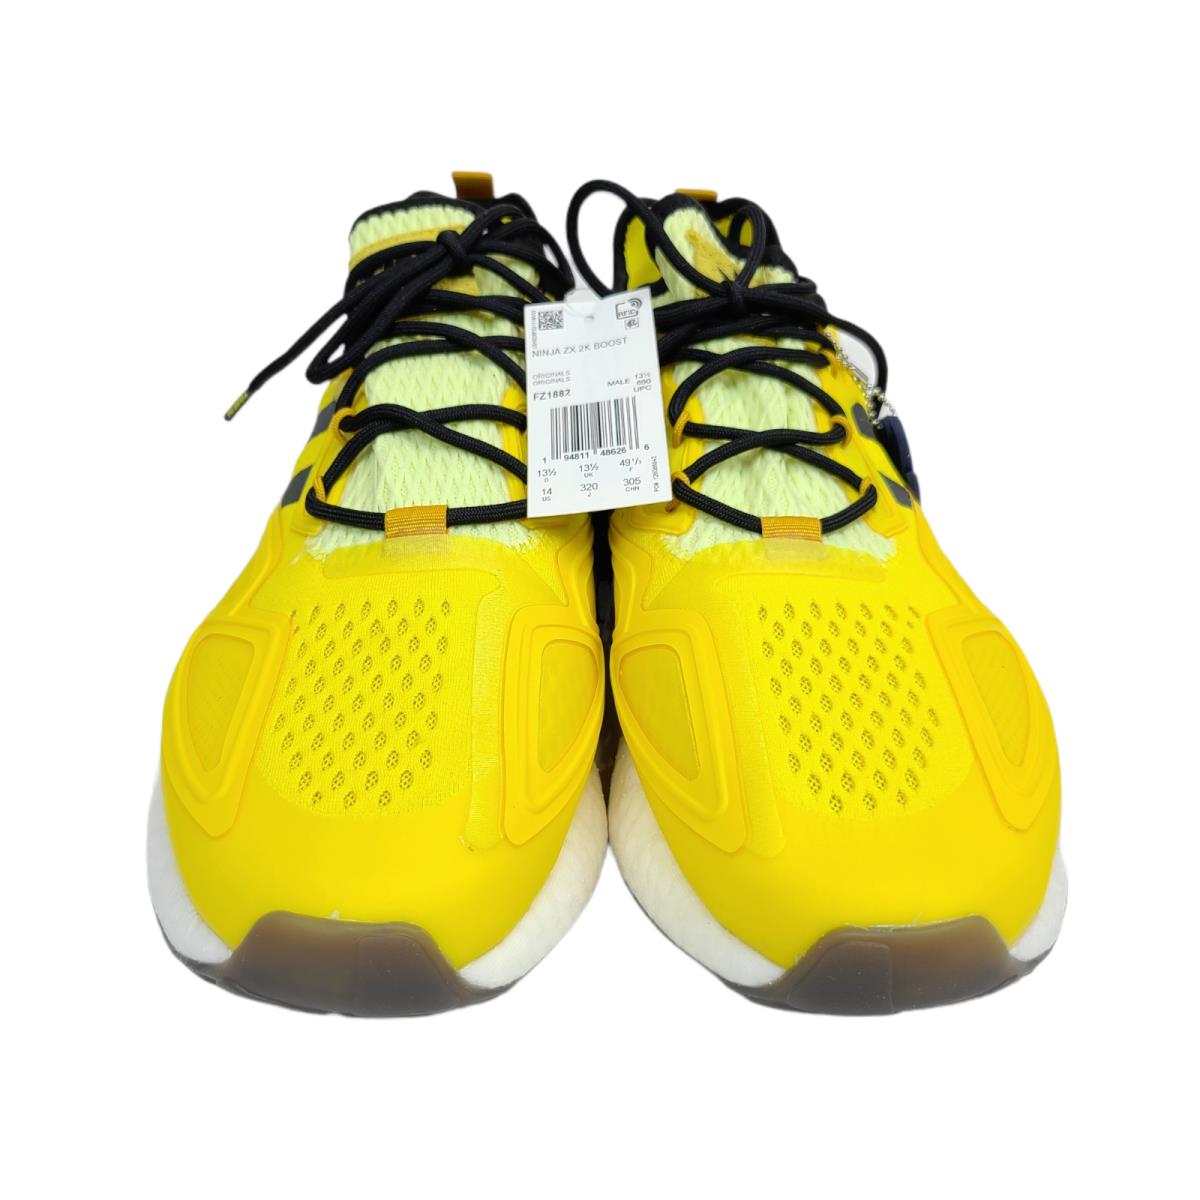 Adidas shoes Boost - Yellow 20